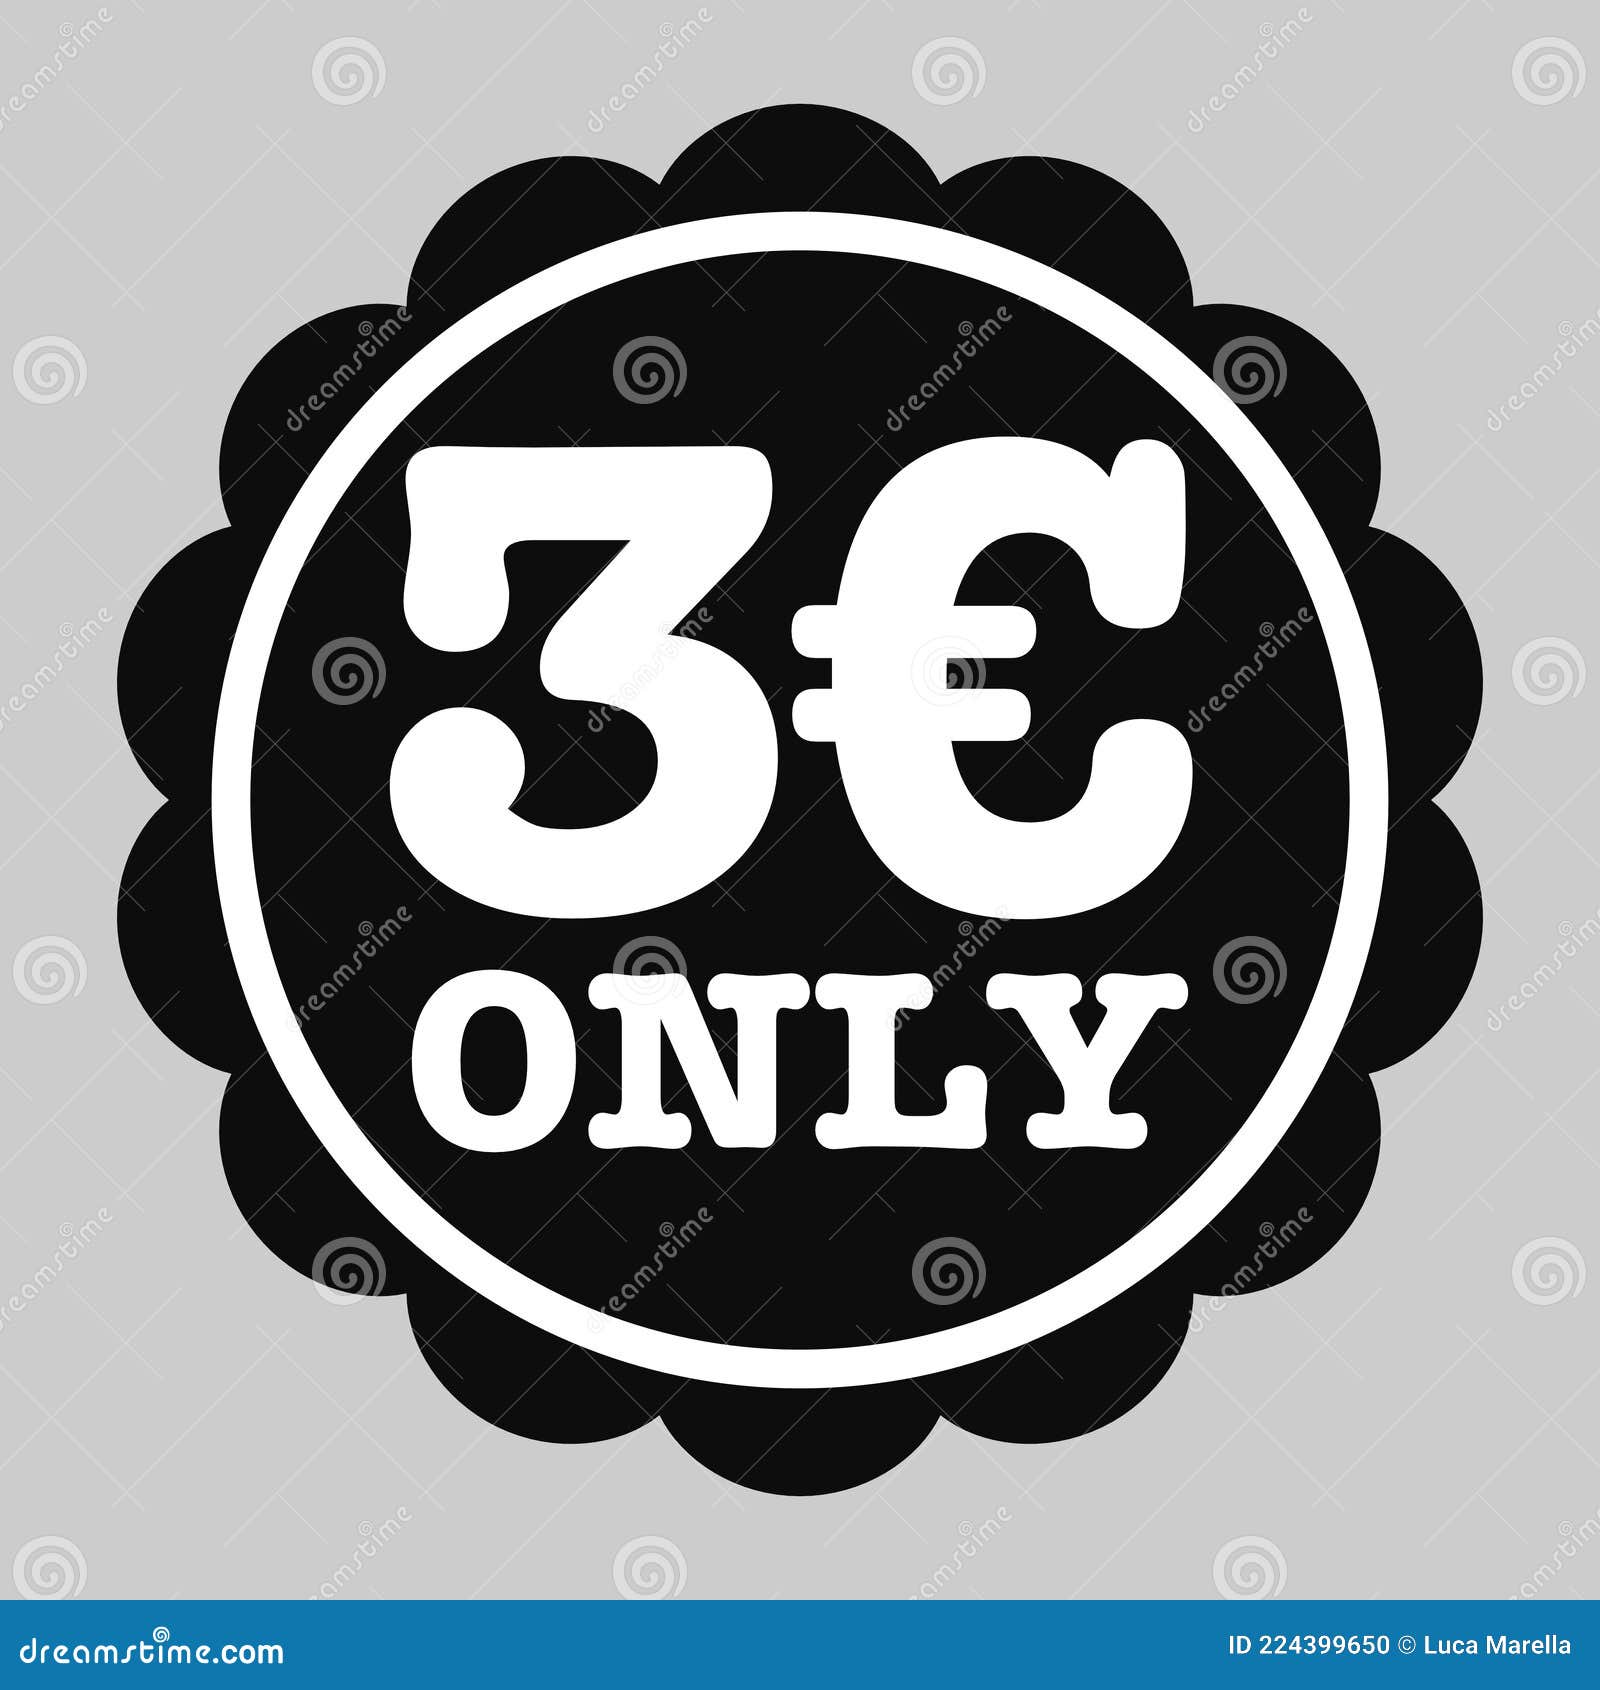 3 Euro only Badge Illustration Stock Vector - Illustration of sign,  currency: 224399650